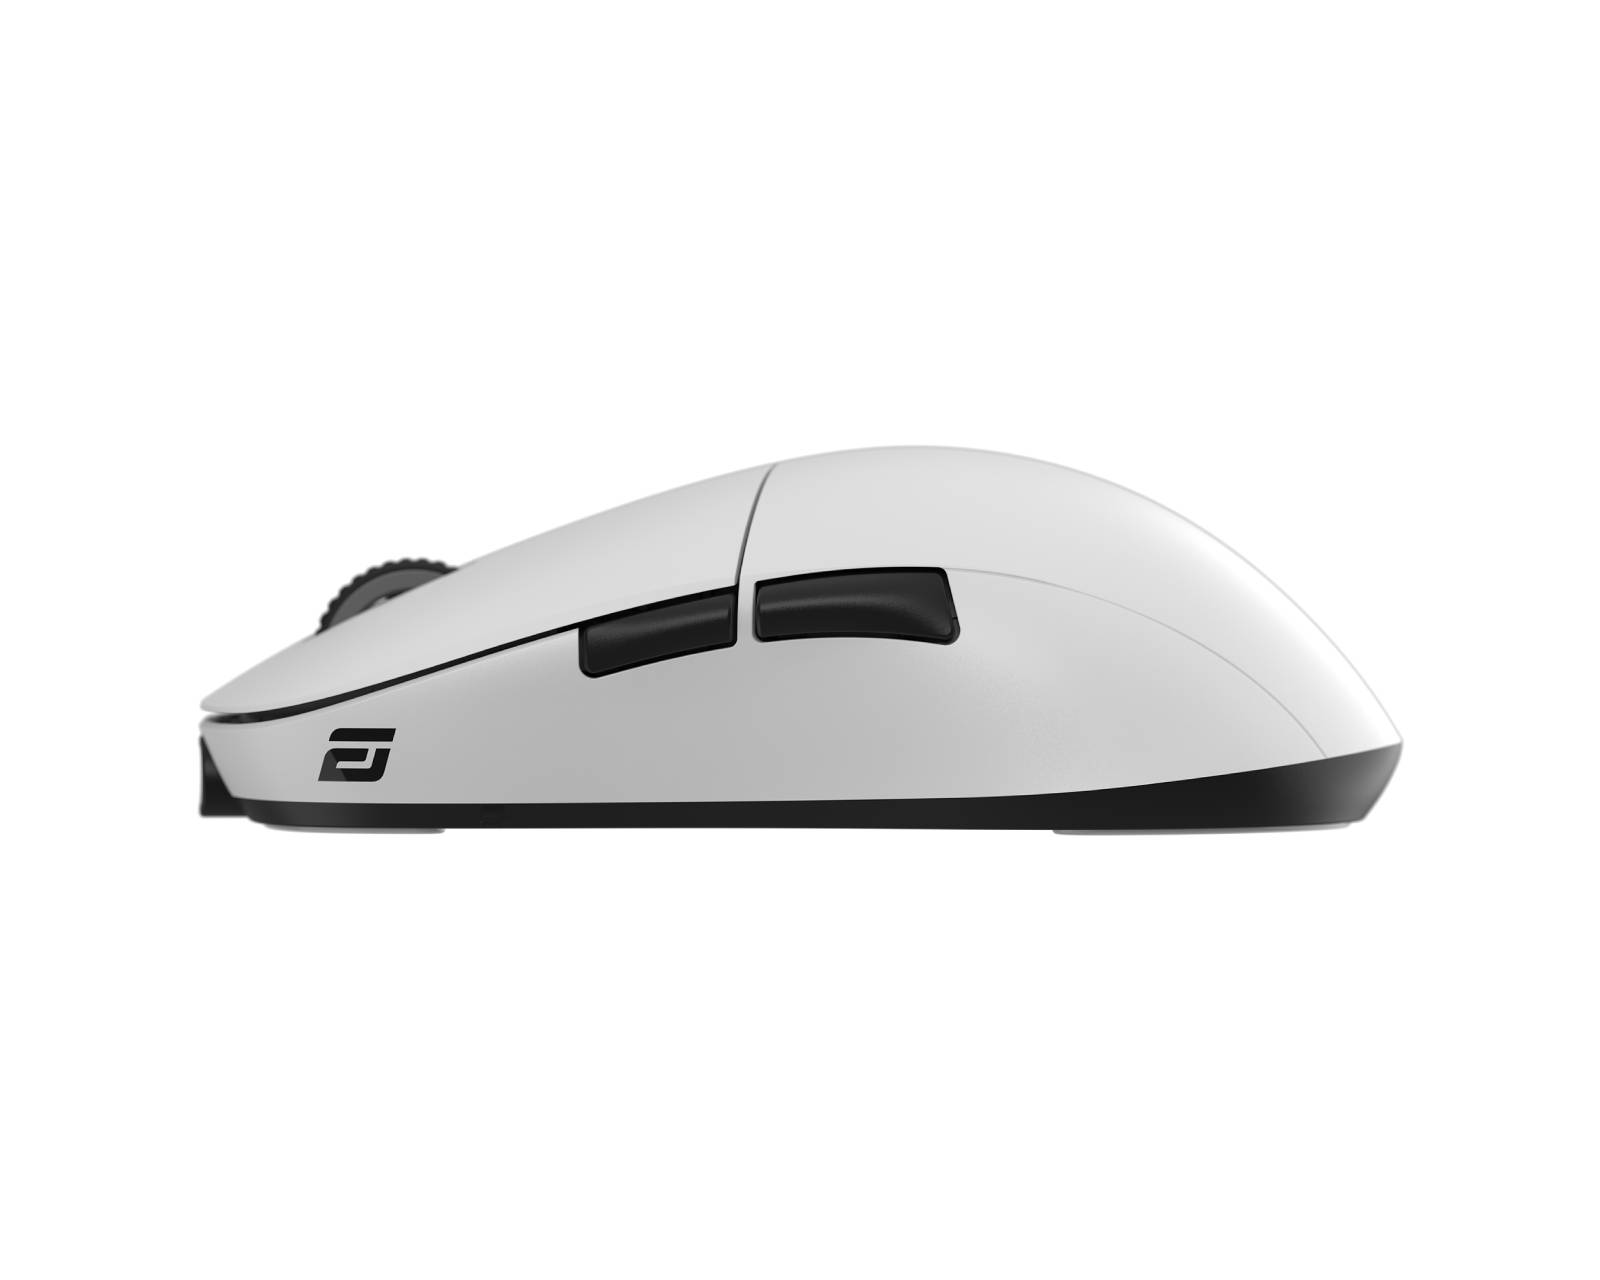 Endgame Gear XM2we Wireless Gaming Mouse - White - us.MaxGaming.com